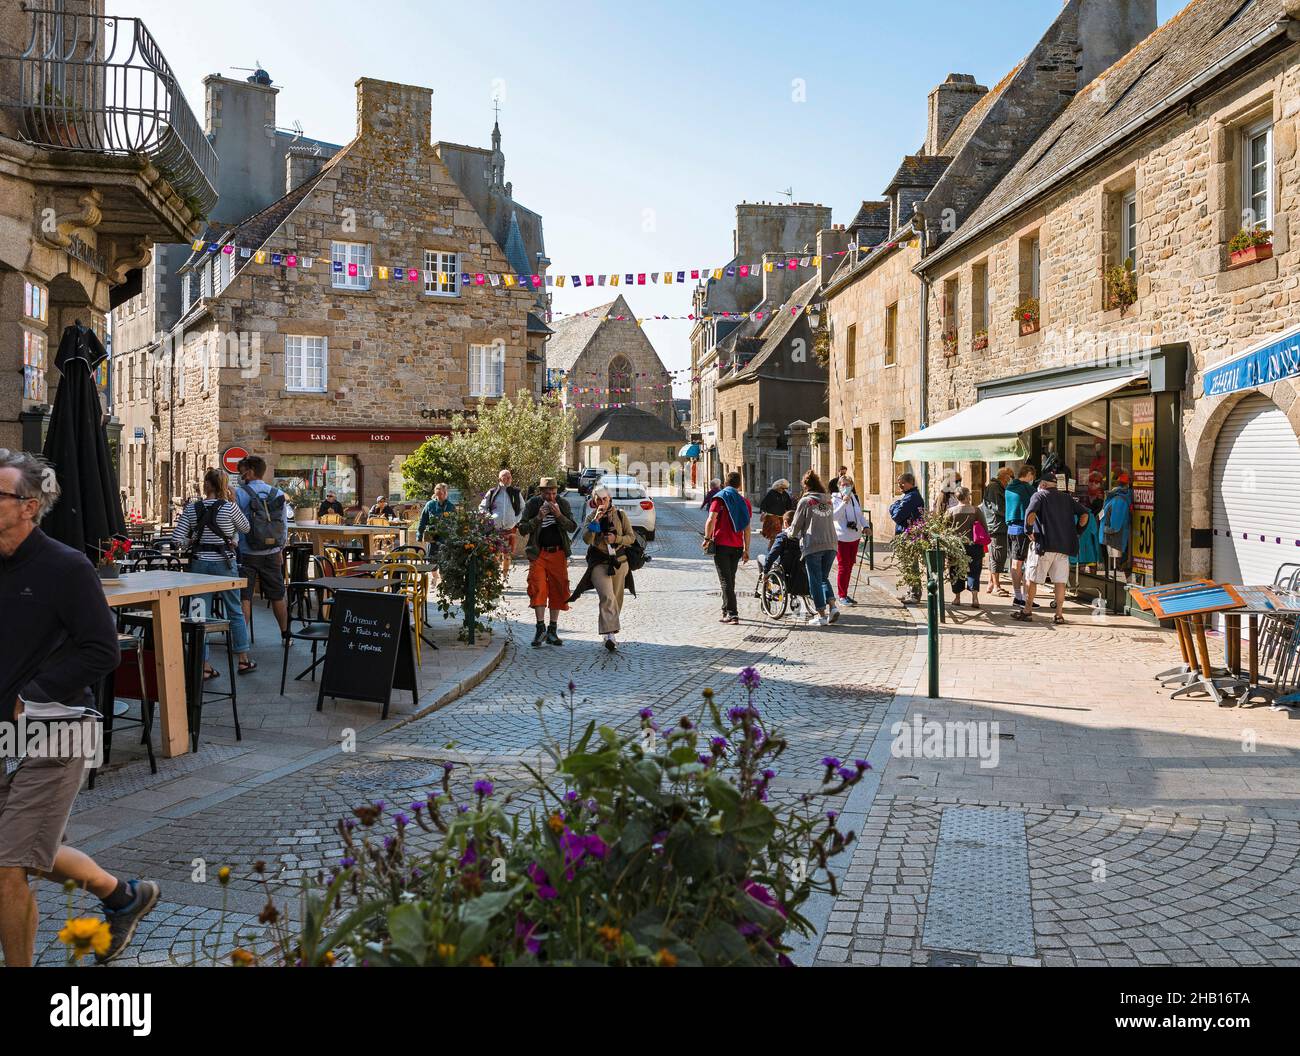 Roscoff (Brittany, north-western France): “rue Amiral Reveillere” street in the town centre Stock Photo